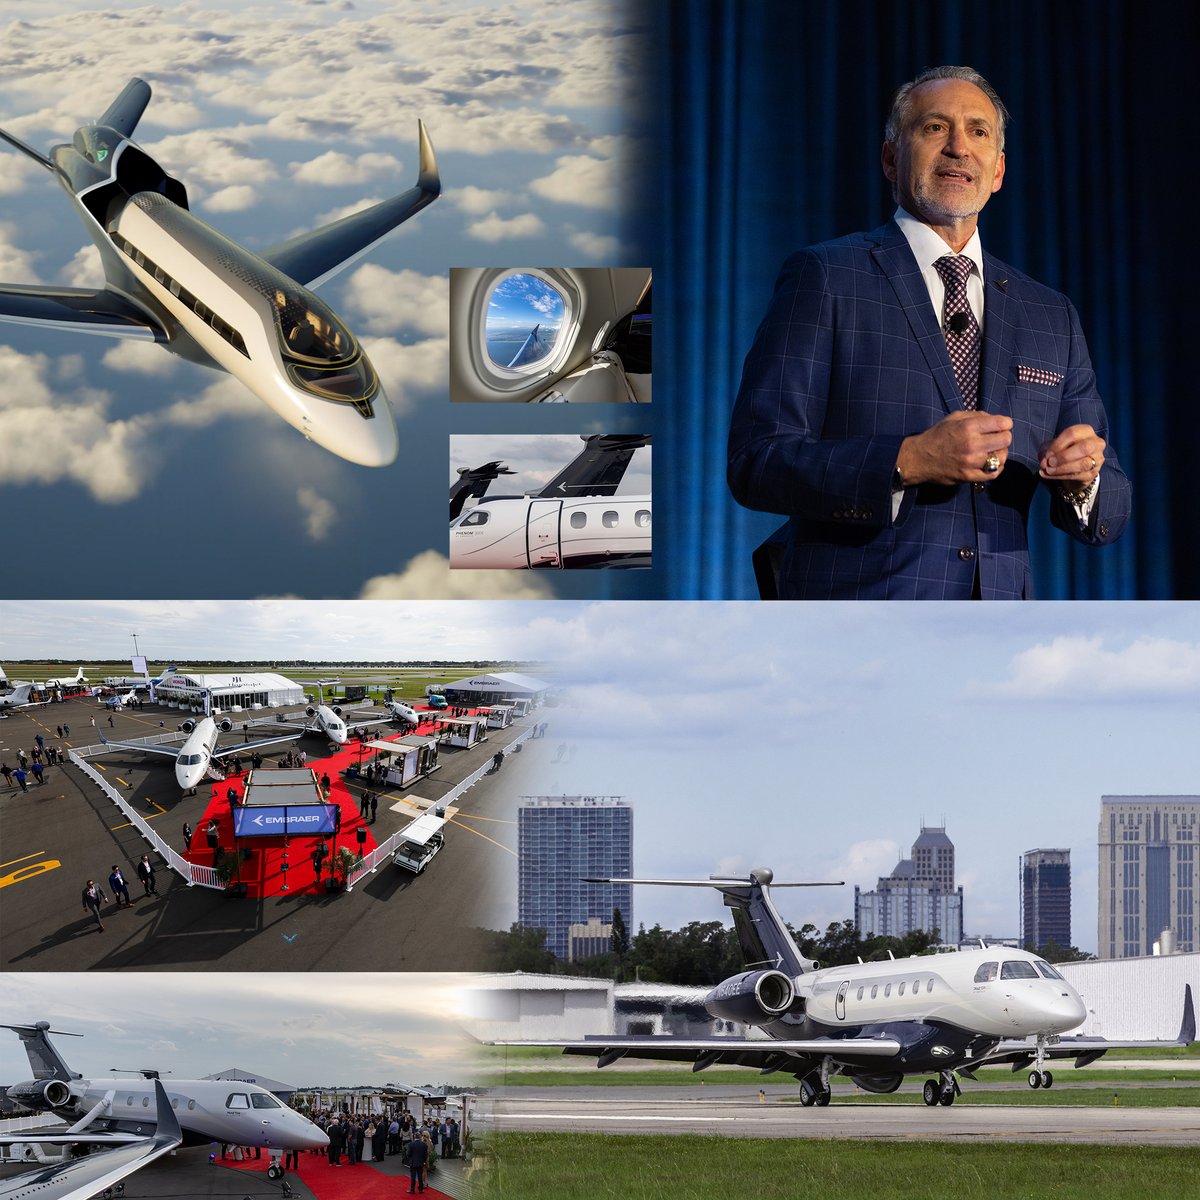 As we reach the end of #NBAA2022, #Embraer reflects on what a great week it was with our customers and business aviation community. We hope you had a wonderful time at the show (or experiencing it digitally online). Here’s to next year! #WeAreEmbraer #EmbraerStories